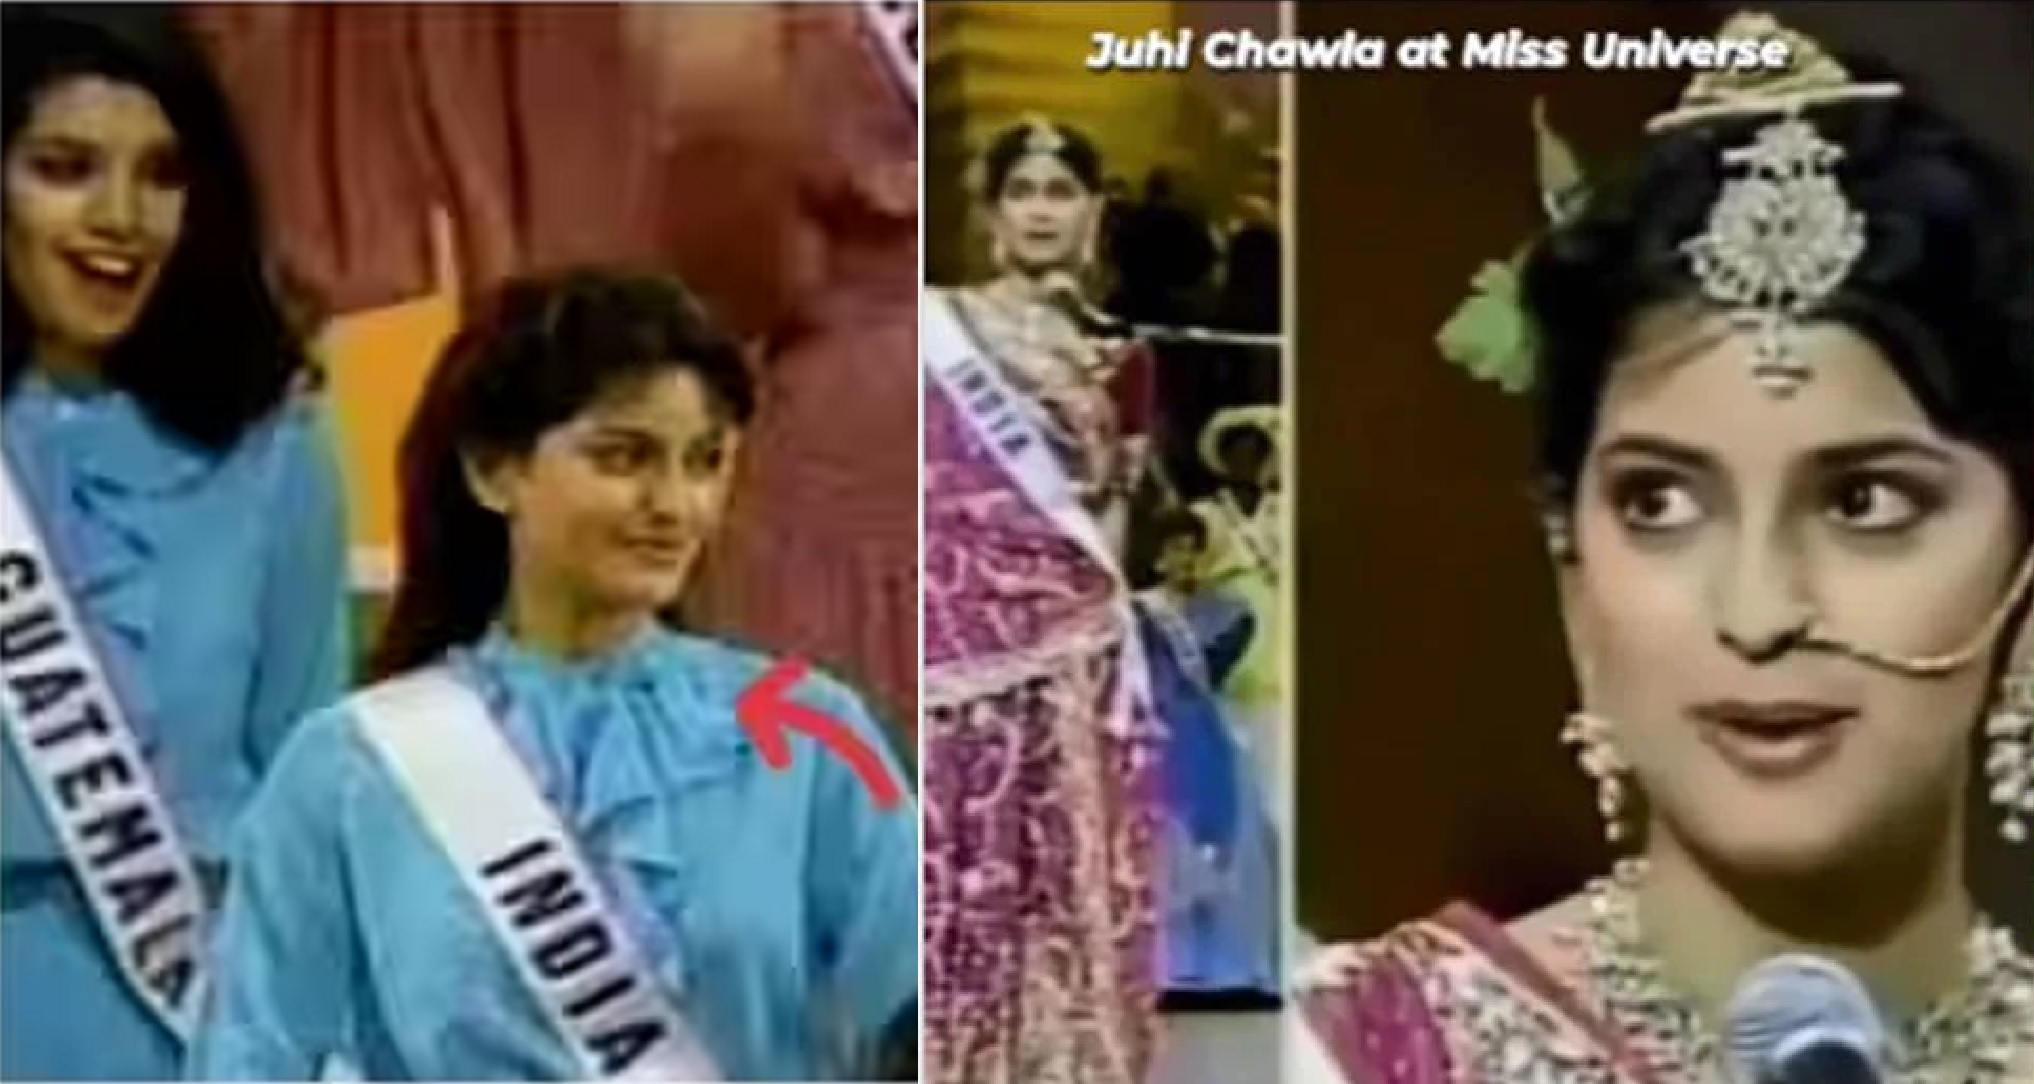 Watch: Old Video From Juhi Chawla’s 1984 Miss Universe Participation Goes Viral